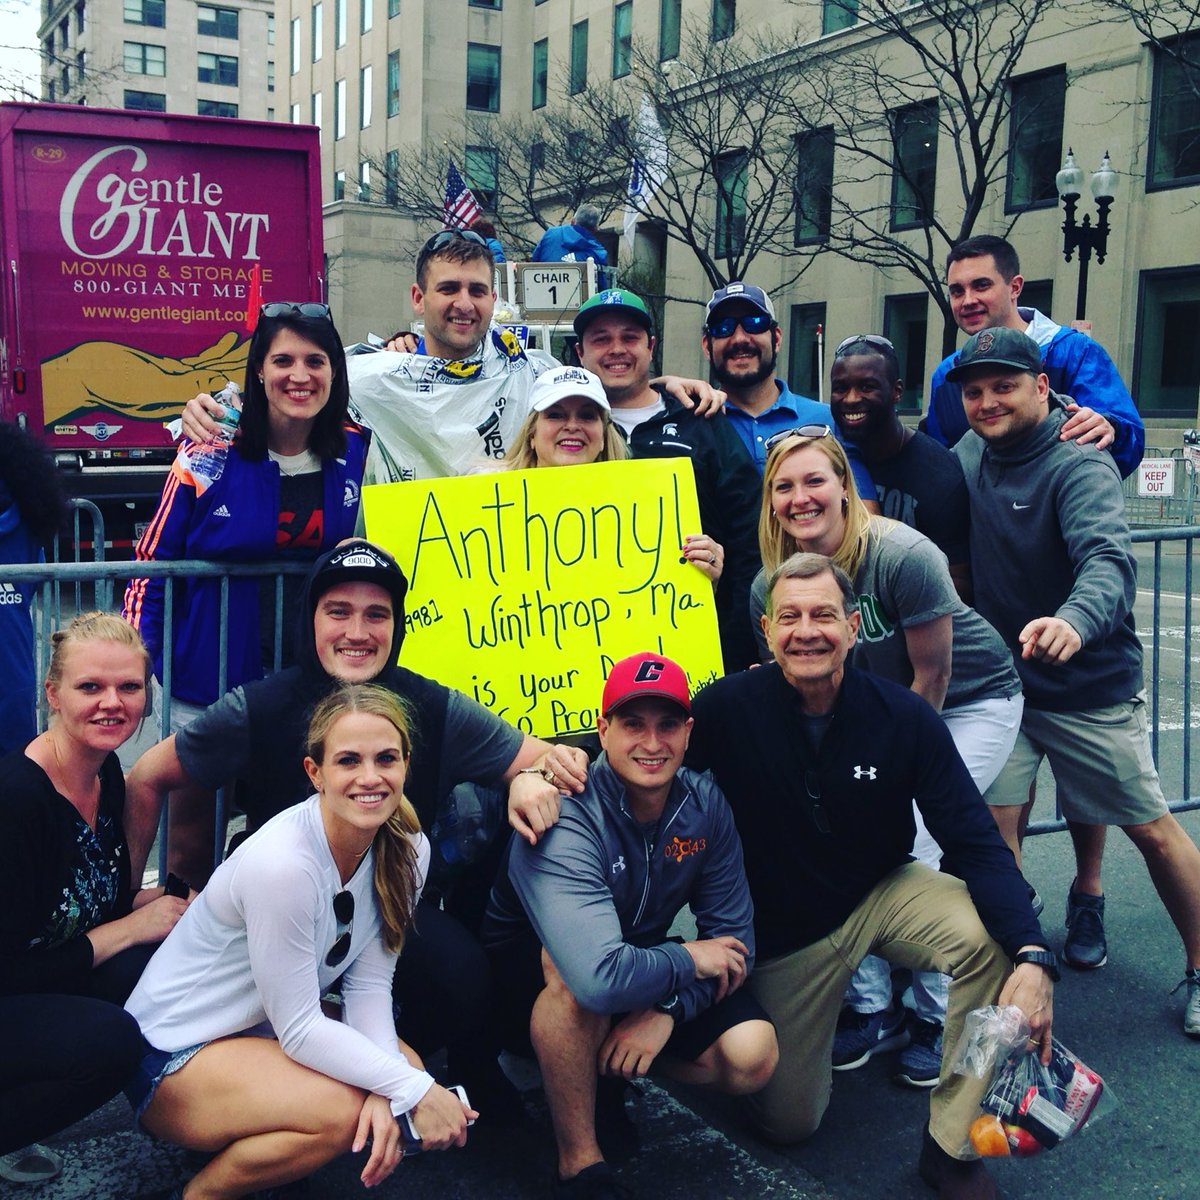 Best of luck to all the runners in the Boston Marathon today. Was an amazing experience for me back in 2017 but one and done for this guy. #Boston